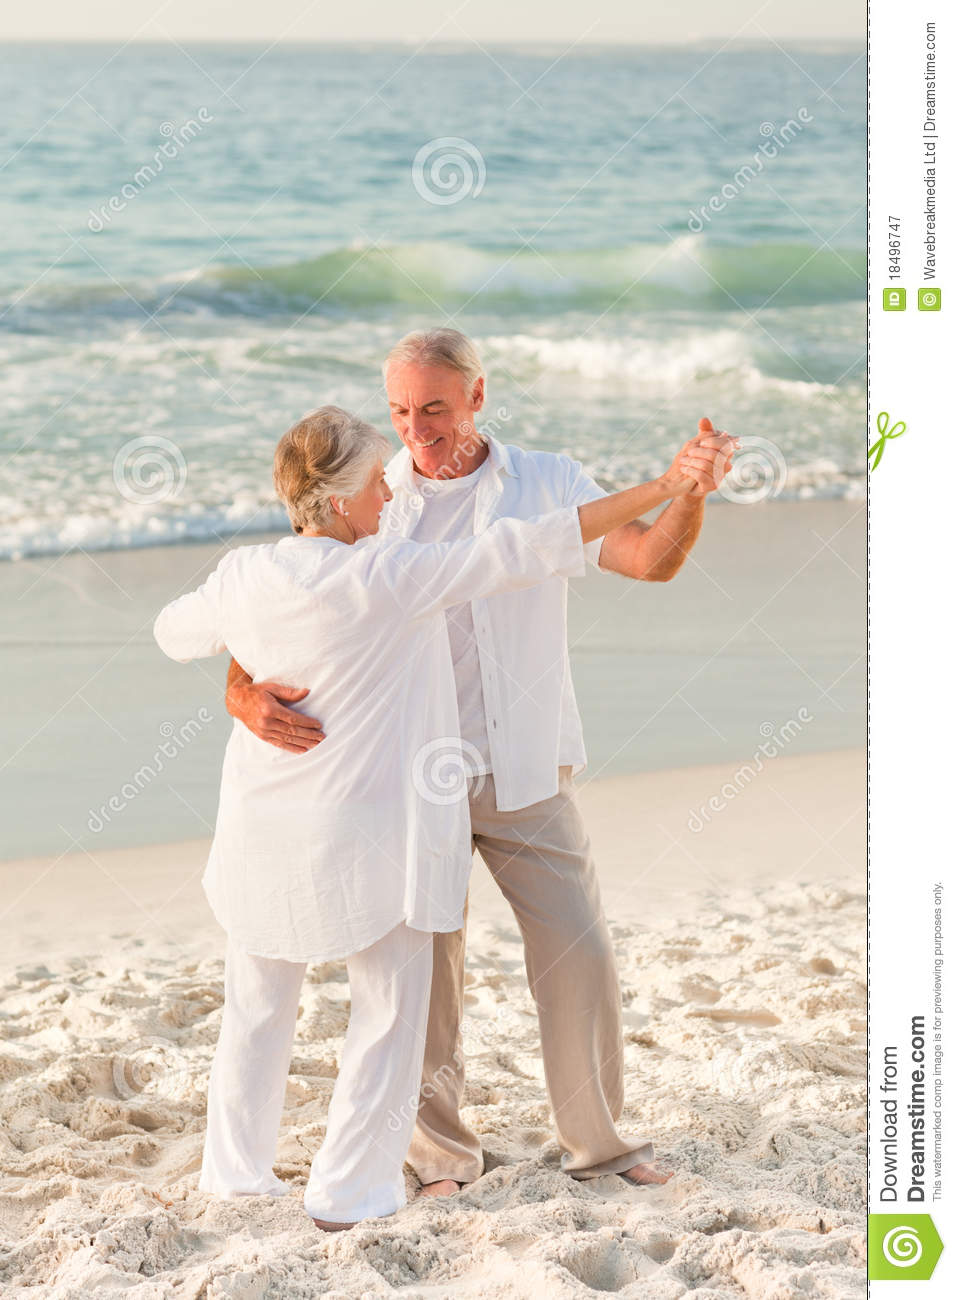 Royalty Free Stock Photography  Elderly Couple Dancing On The Beach